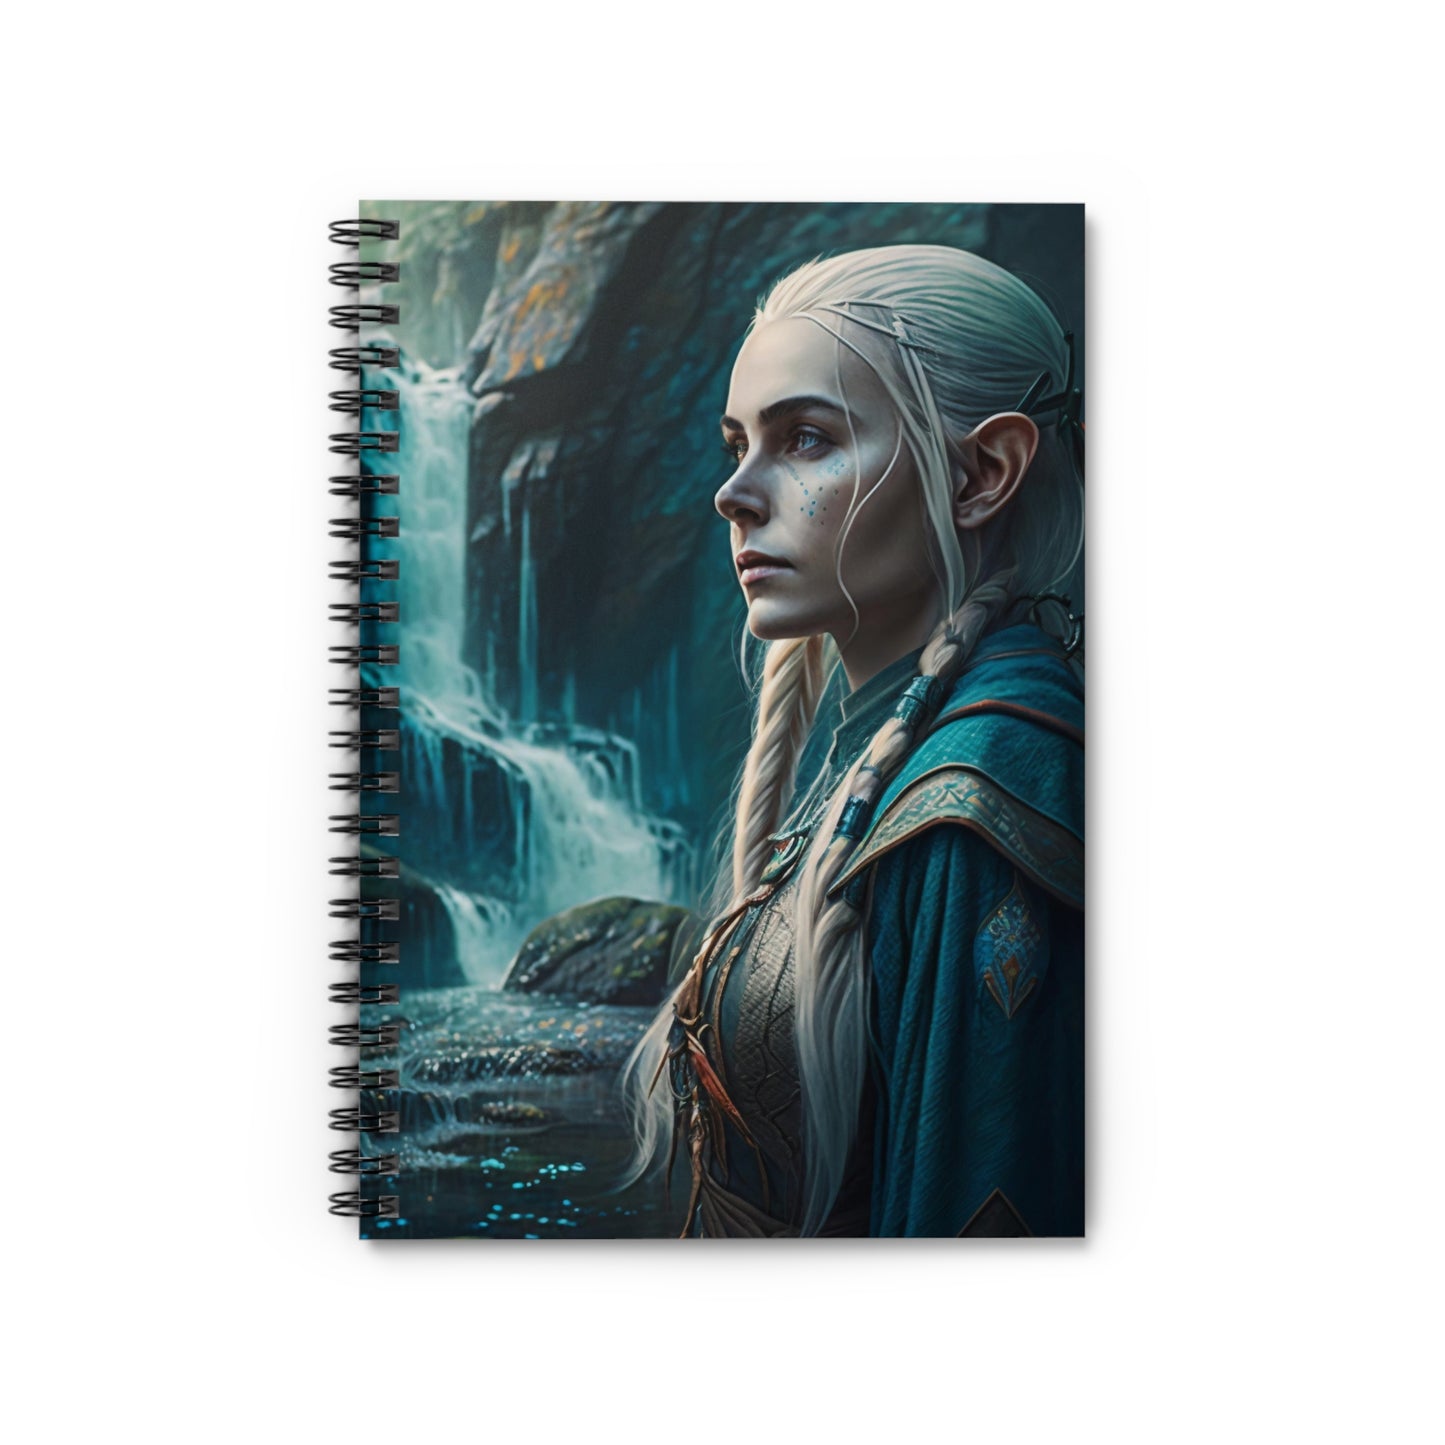 DnD Campaign Journal, Elf by Waterfall Spiral Notebook, Ruled Line, Tabletop Gaming D&D Character Notepad, Pathfinder Journal, Serene Realms